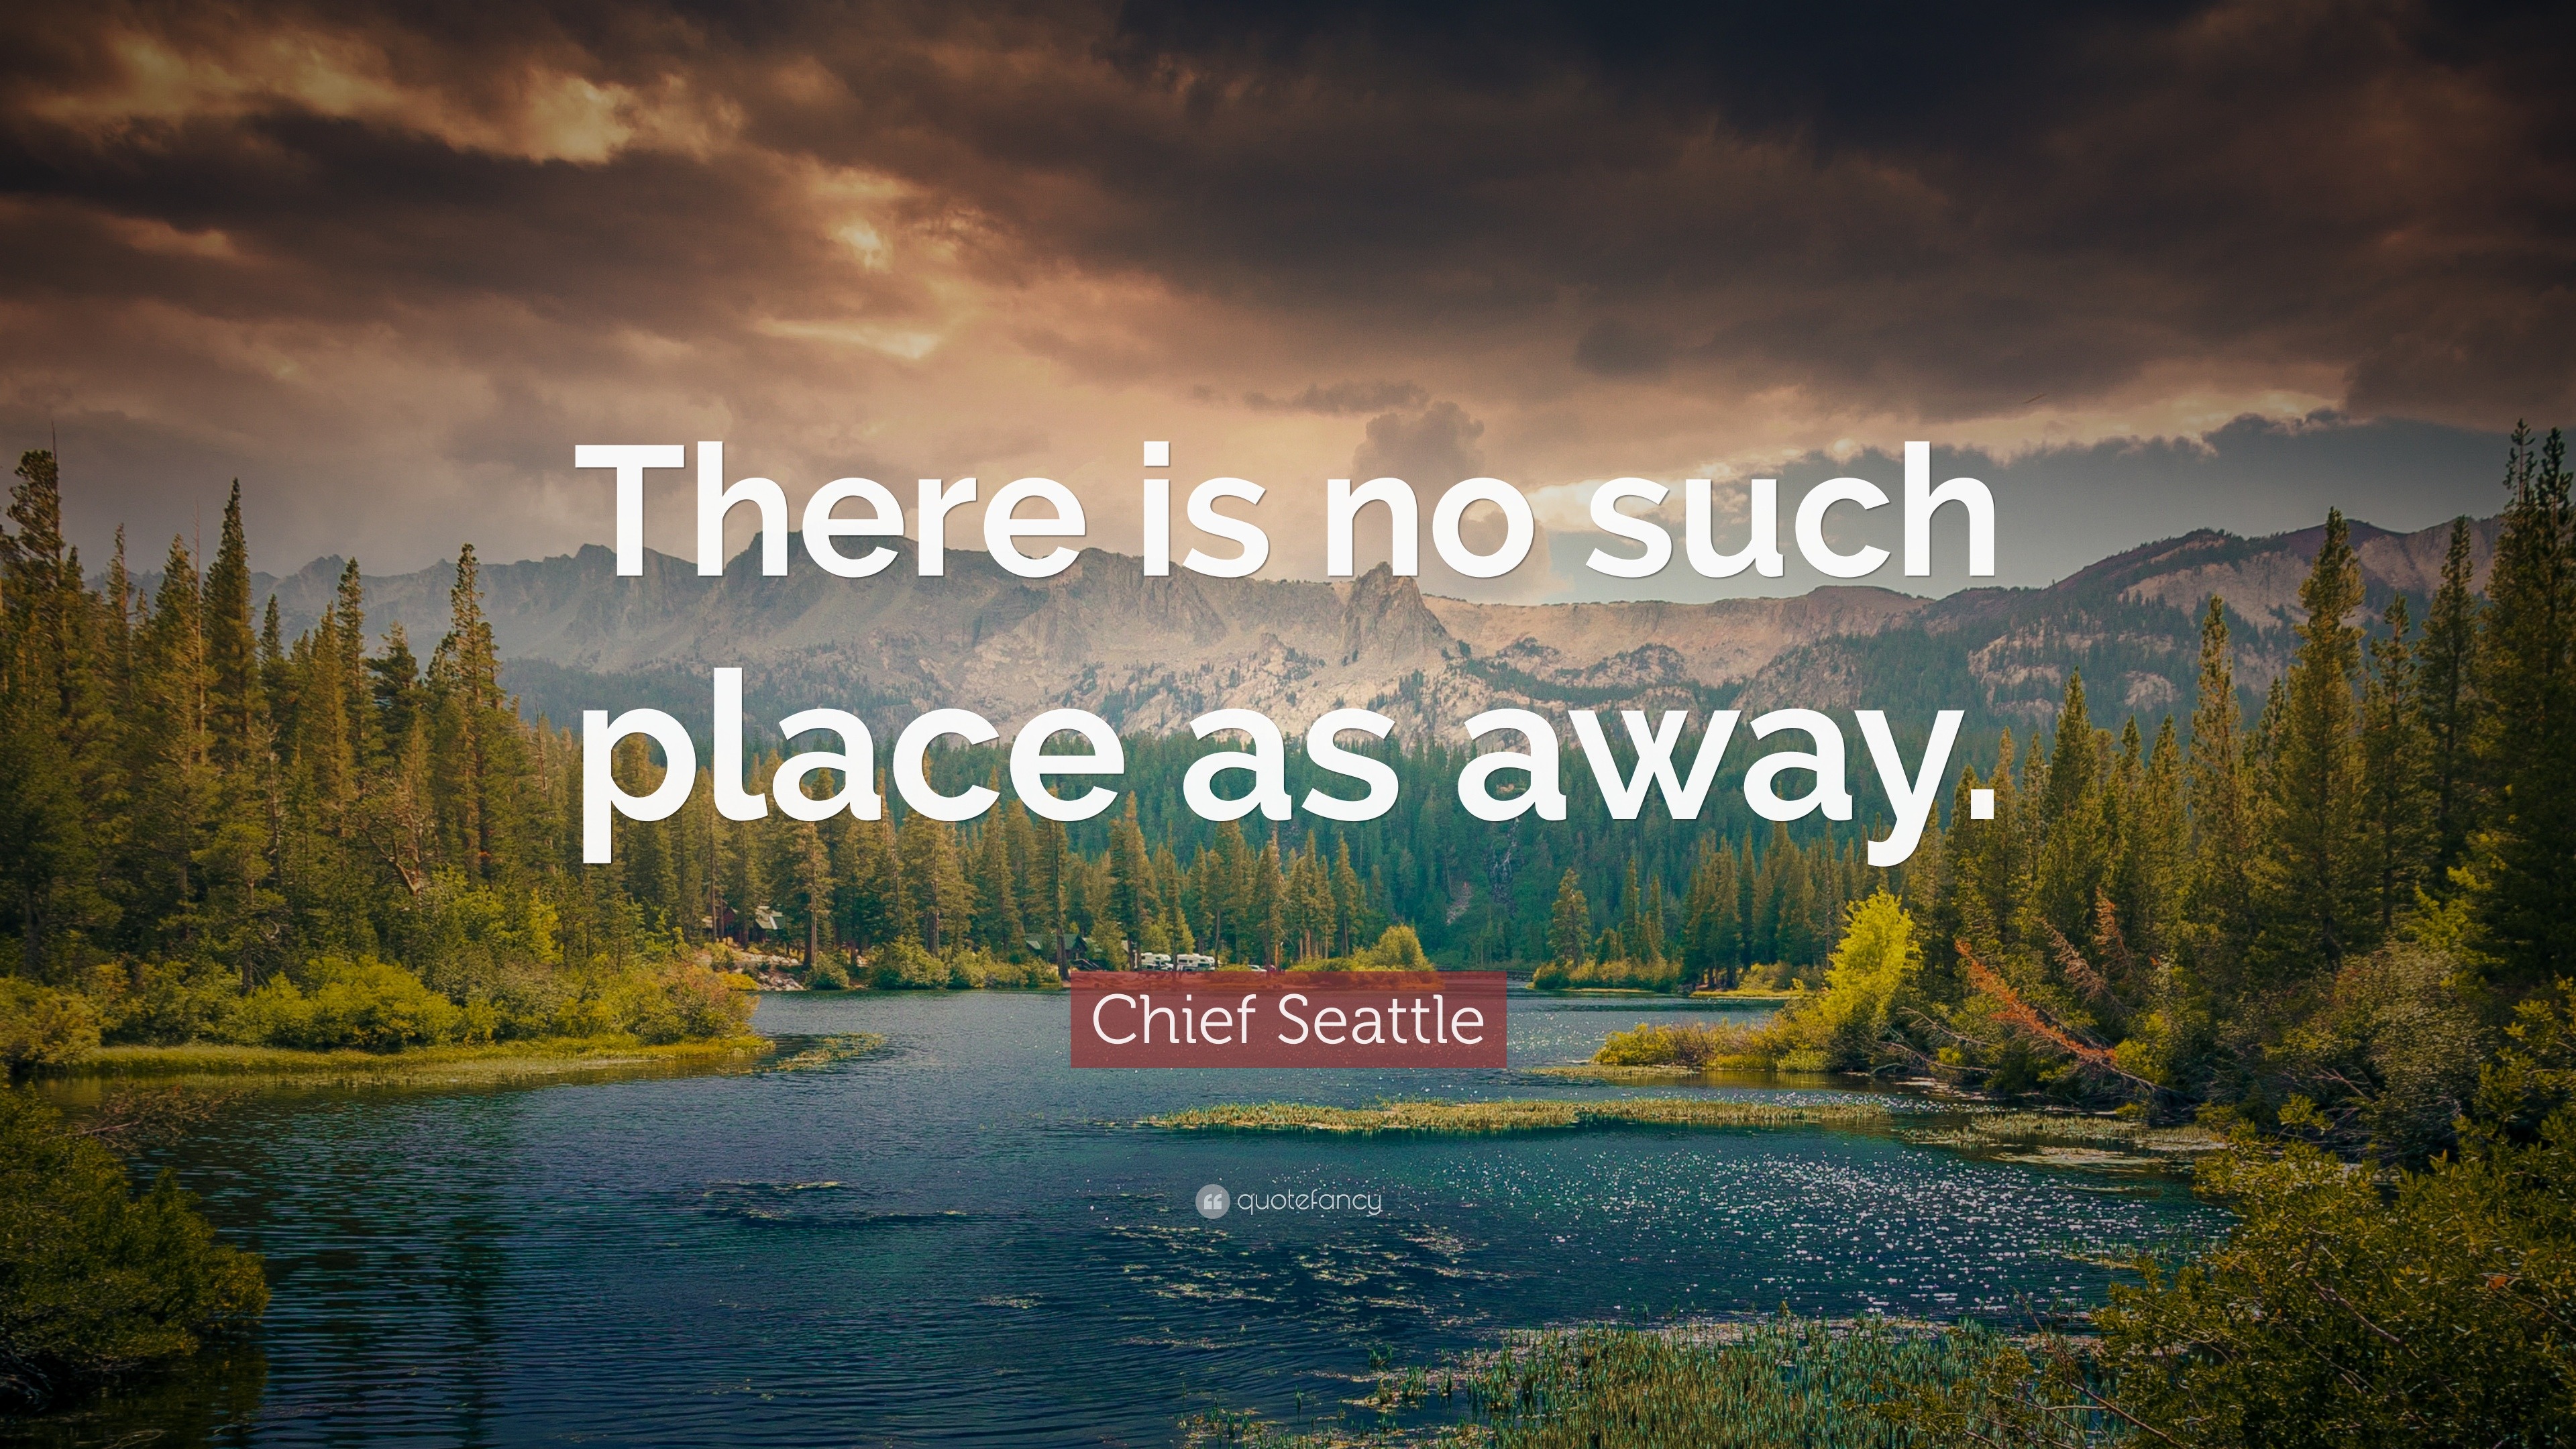 Chief Seattle Quote: "There is no such place as away." (9 wallpapers) - Quotefancy